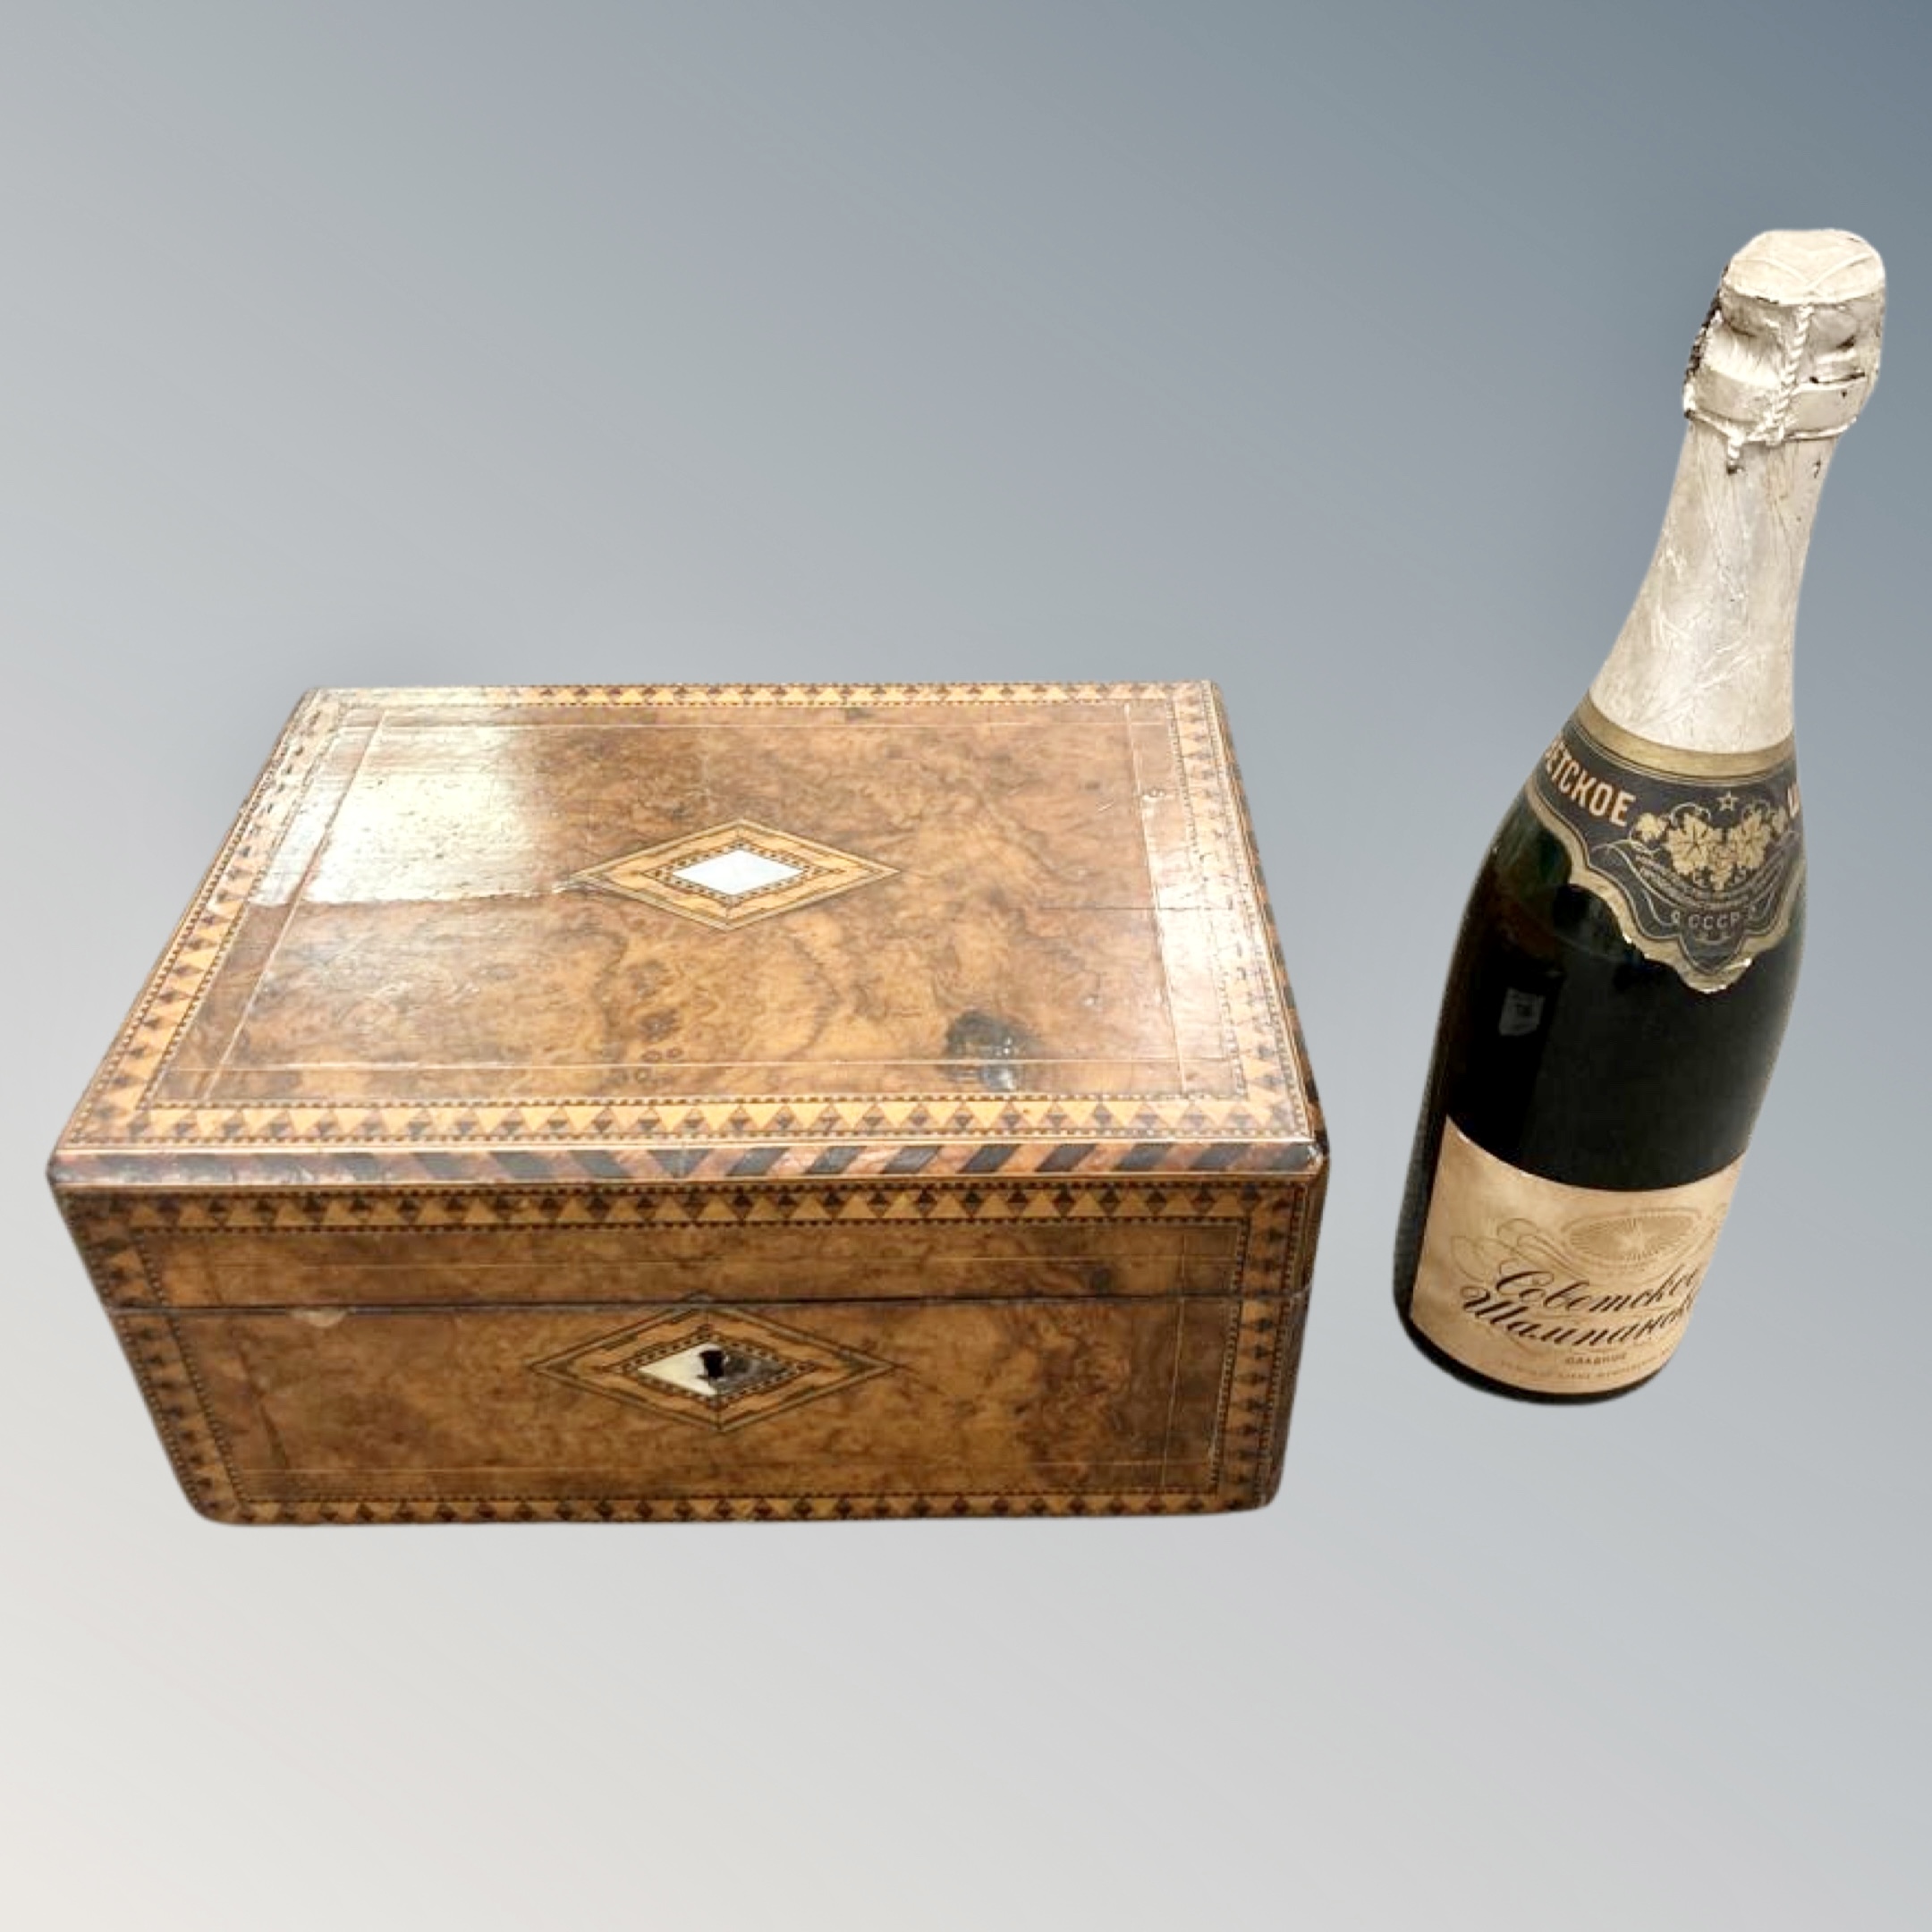 A Victorian inlaid walnut jewellery box together with One bottle of Cobetckoe Polish Sparkling